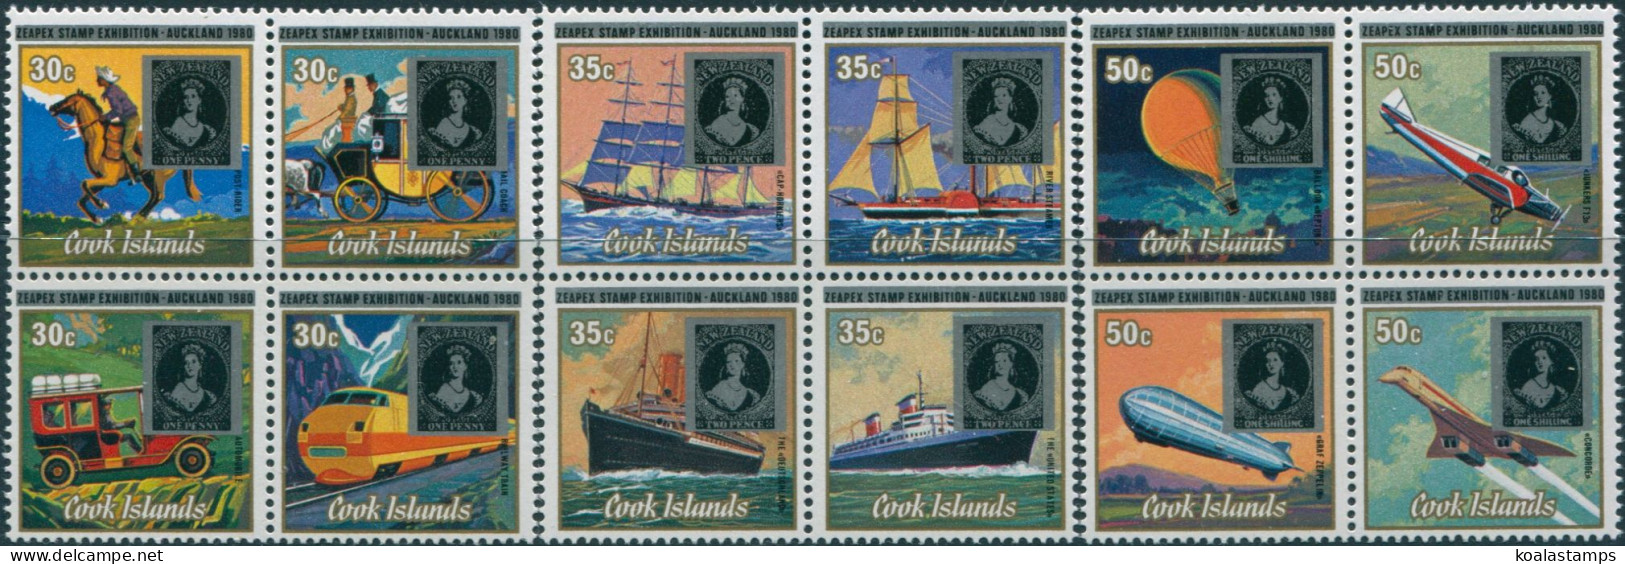 Cook Islands 1980 SG687-698 Zeapex Stamp Exhibition Set MNH - Cookinseln